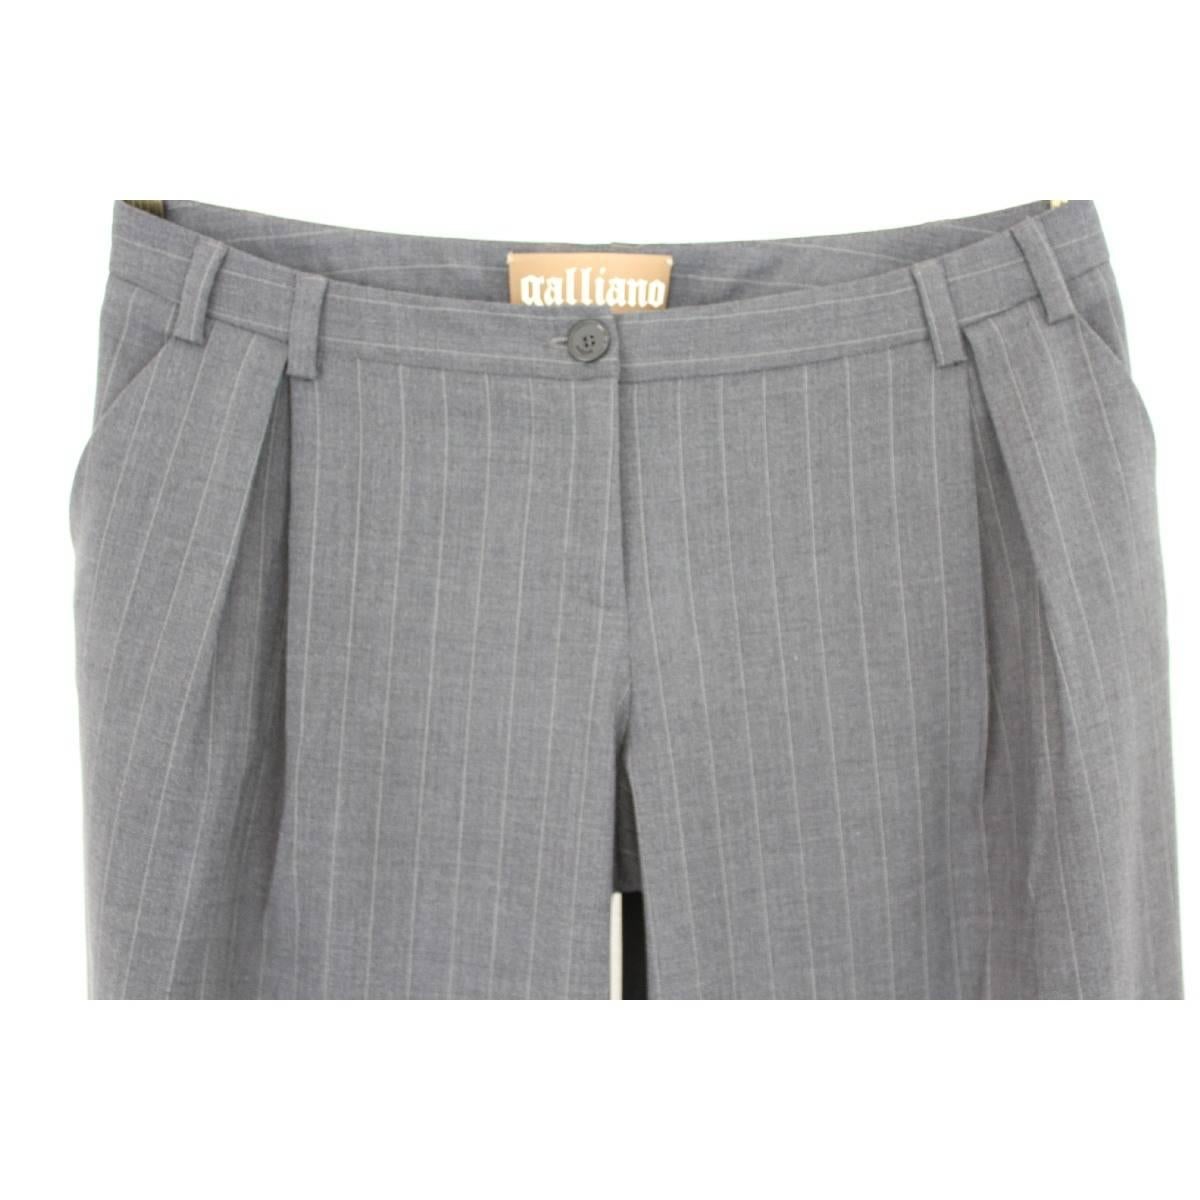 John Galliano wide legs gray pants, pinstripe. She wears soft, palace worn. Wool blend, excellent vintage condition

Size: 30/44

Waist: 44 cm
Hem: 25 cm
Length: 115 cm

Color: gray
Composition: 44% wool 50% polyester 6% other fibers
Conditions: